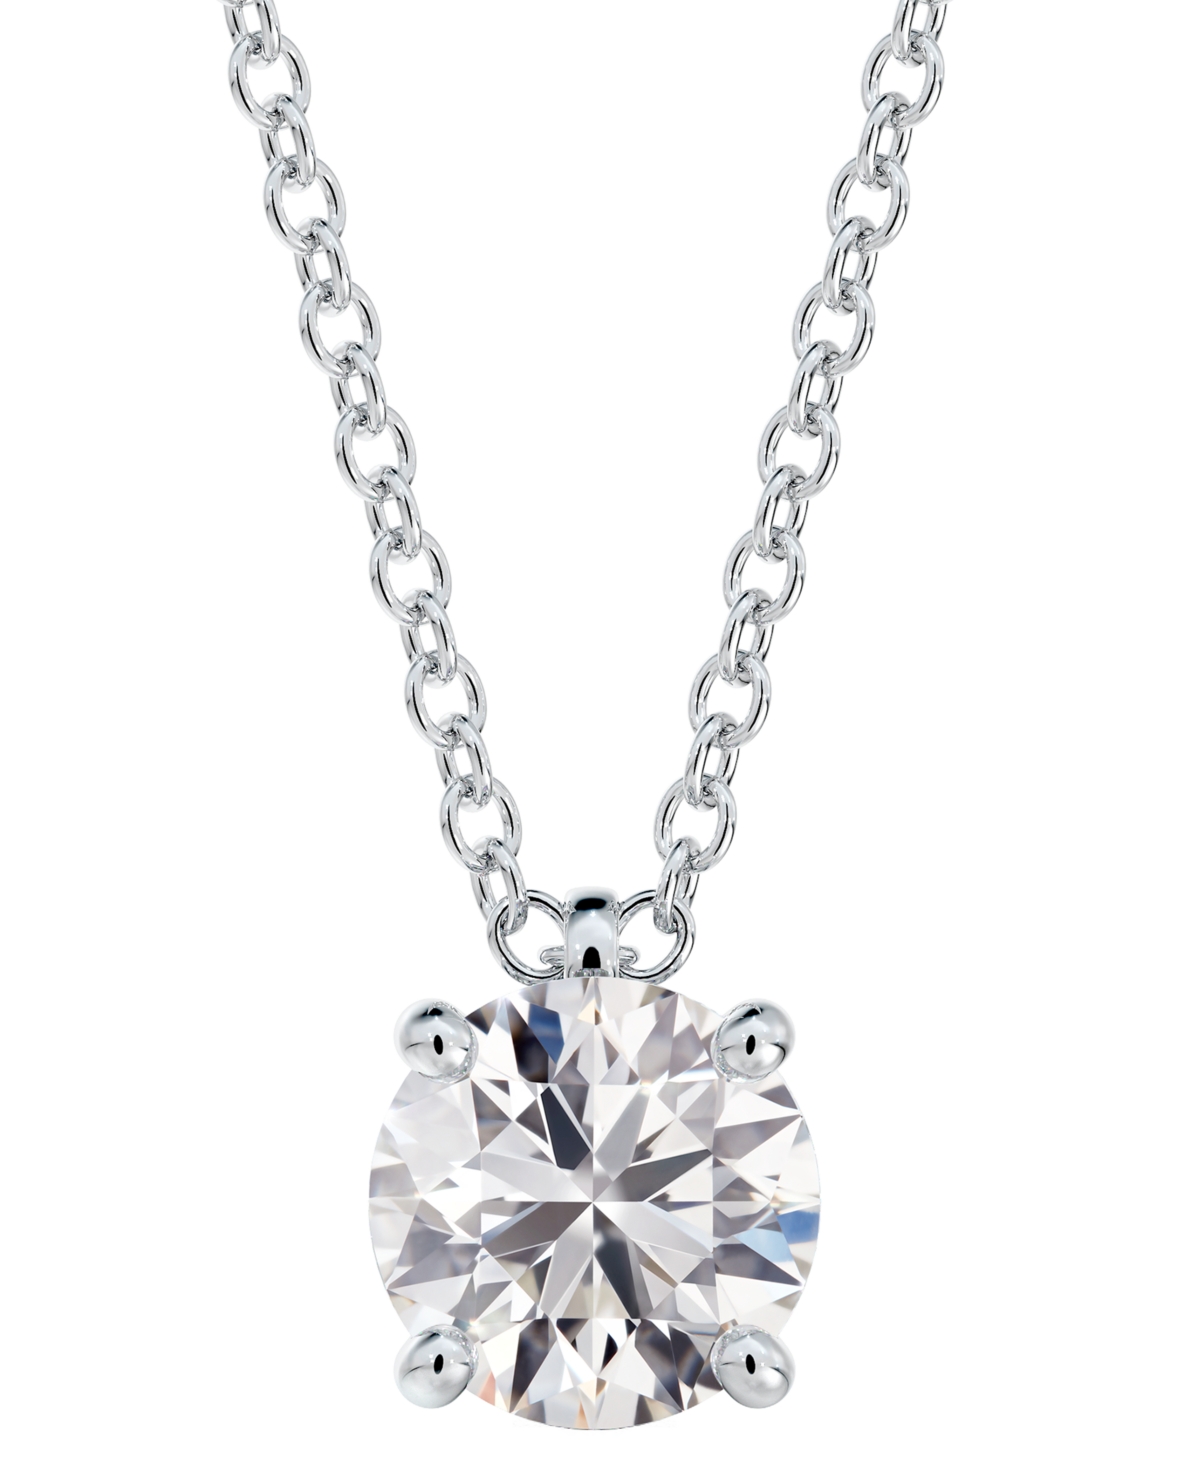 De Beers Forevermark Portfolio by De Beers Forevermark Diamond Solitaire Pendant Necklace (1/2 ct. t.w.) in 14k White or Yellow Gold, 16" + 2" extender